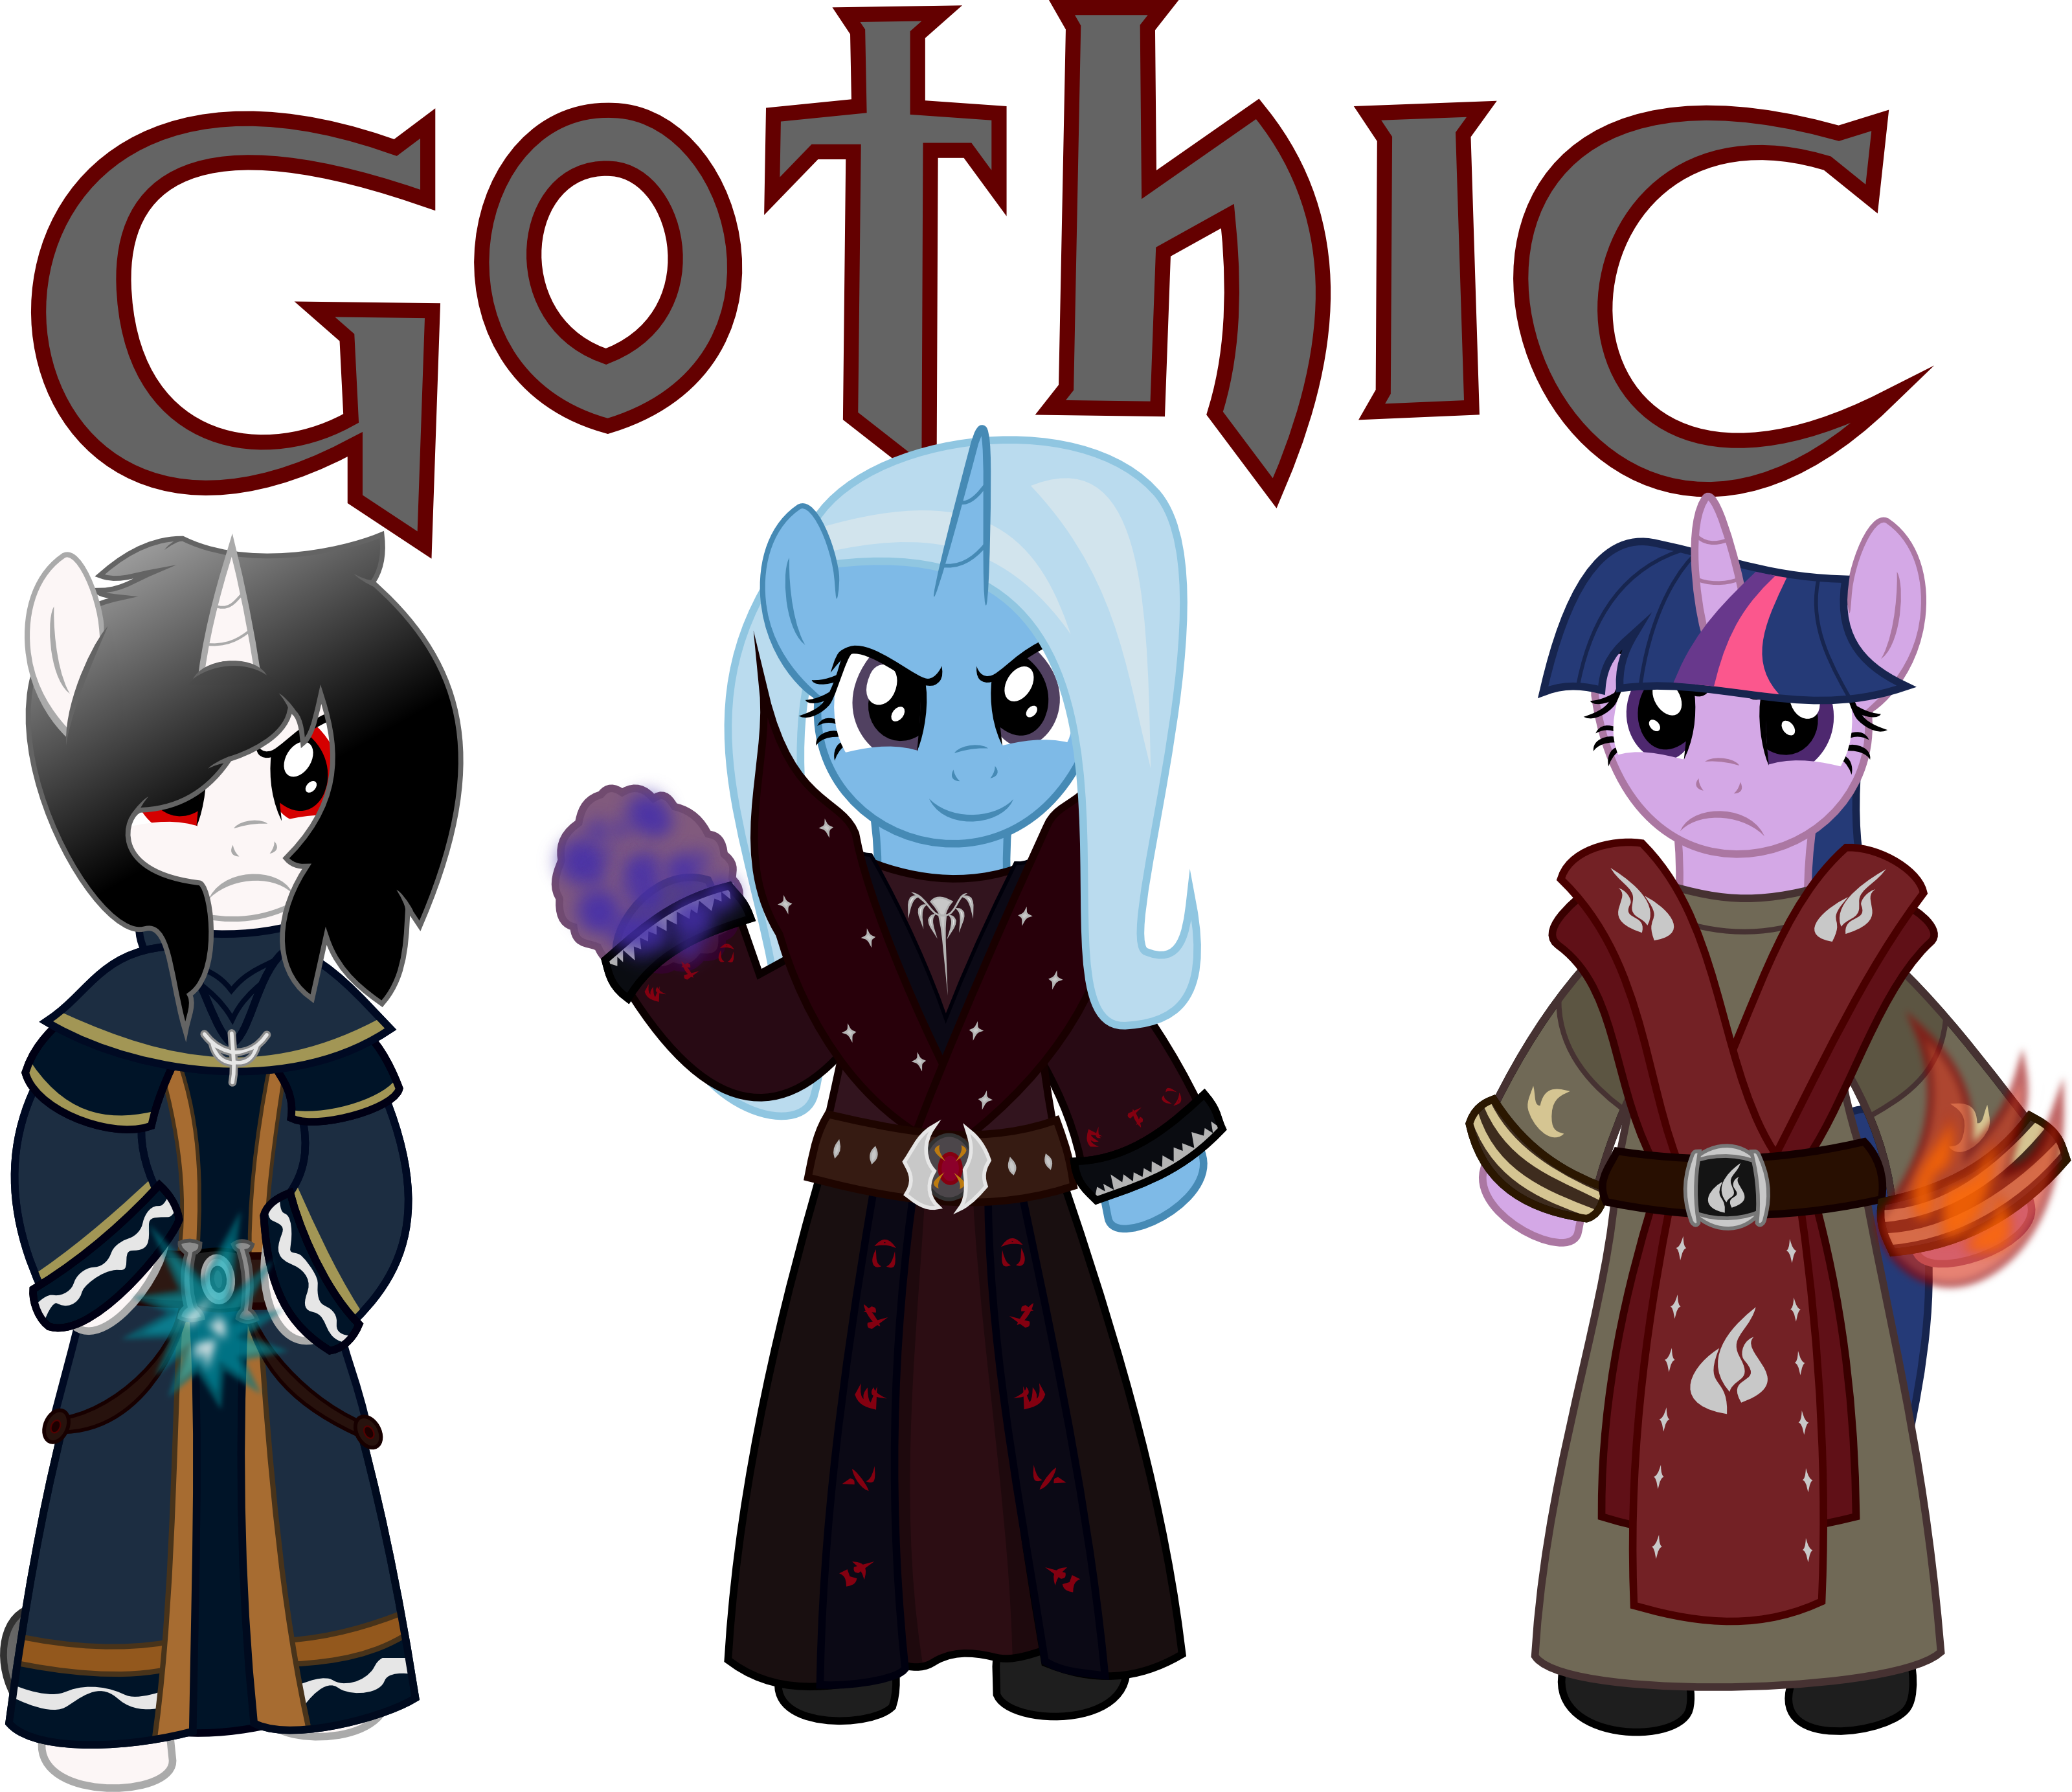 Mlp+gothic1+game+crossover+image+created